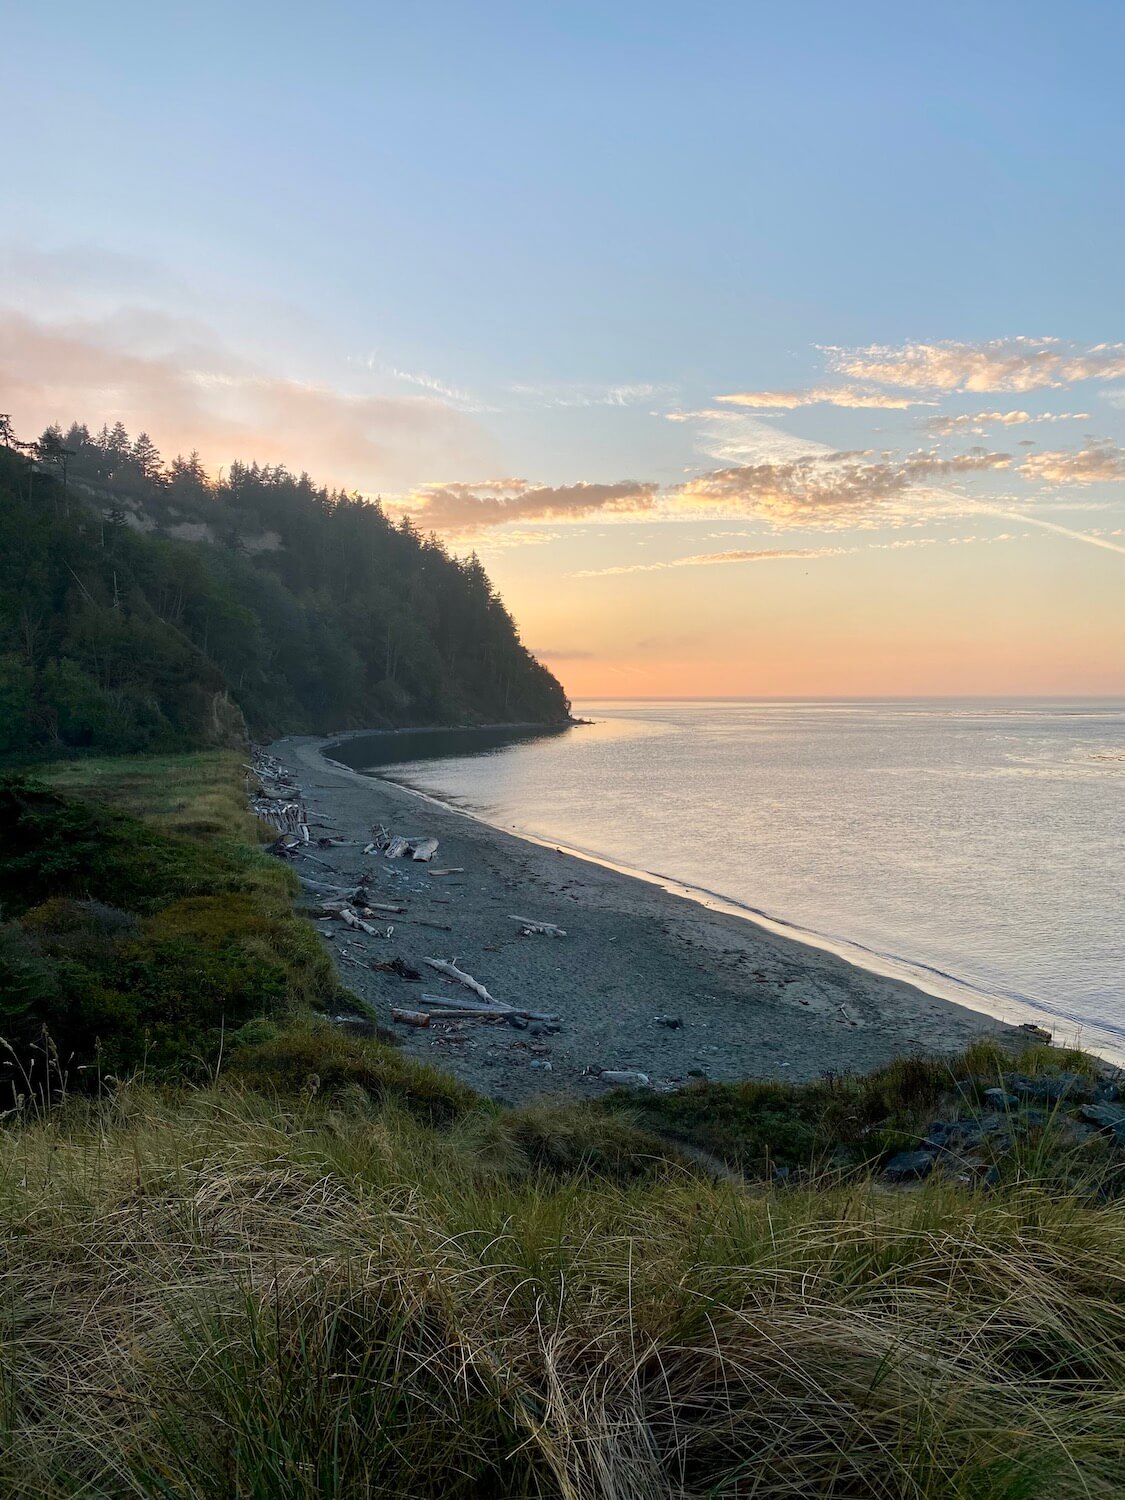 The sun sets over the Strait of Juan De Fuca near Port Townsend, Washington. The beach has small pebbles as light waves approach the shore. Thick green sea grasses line the area between the beach and hillside.